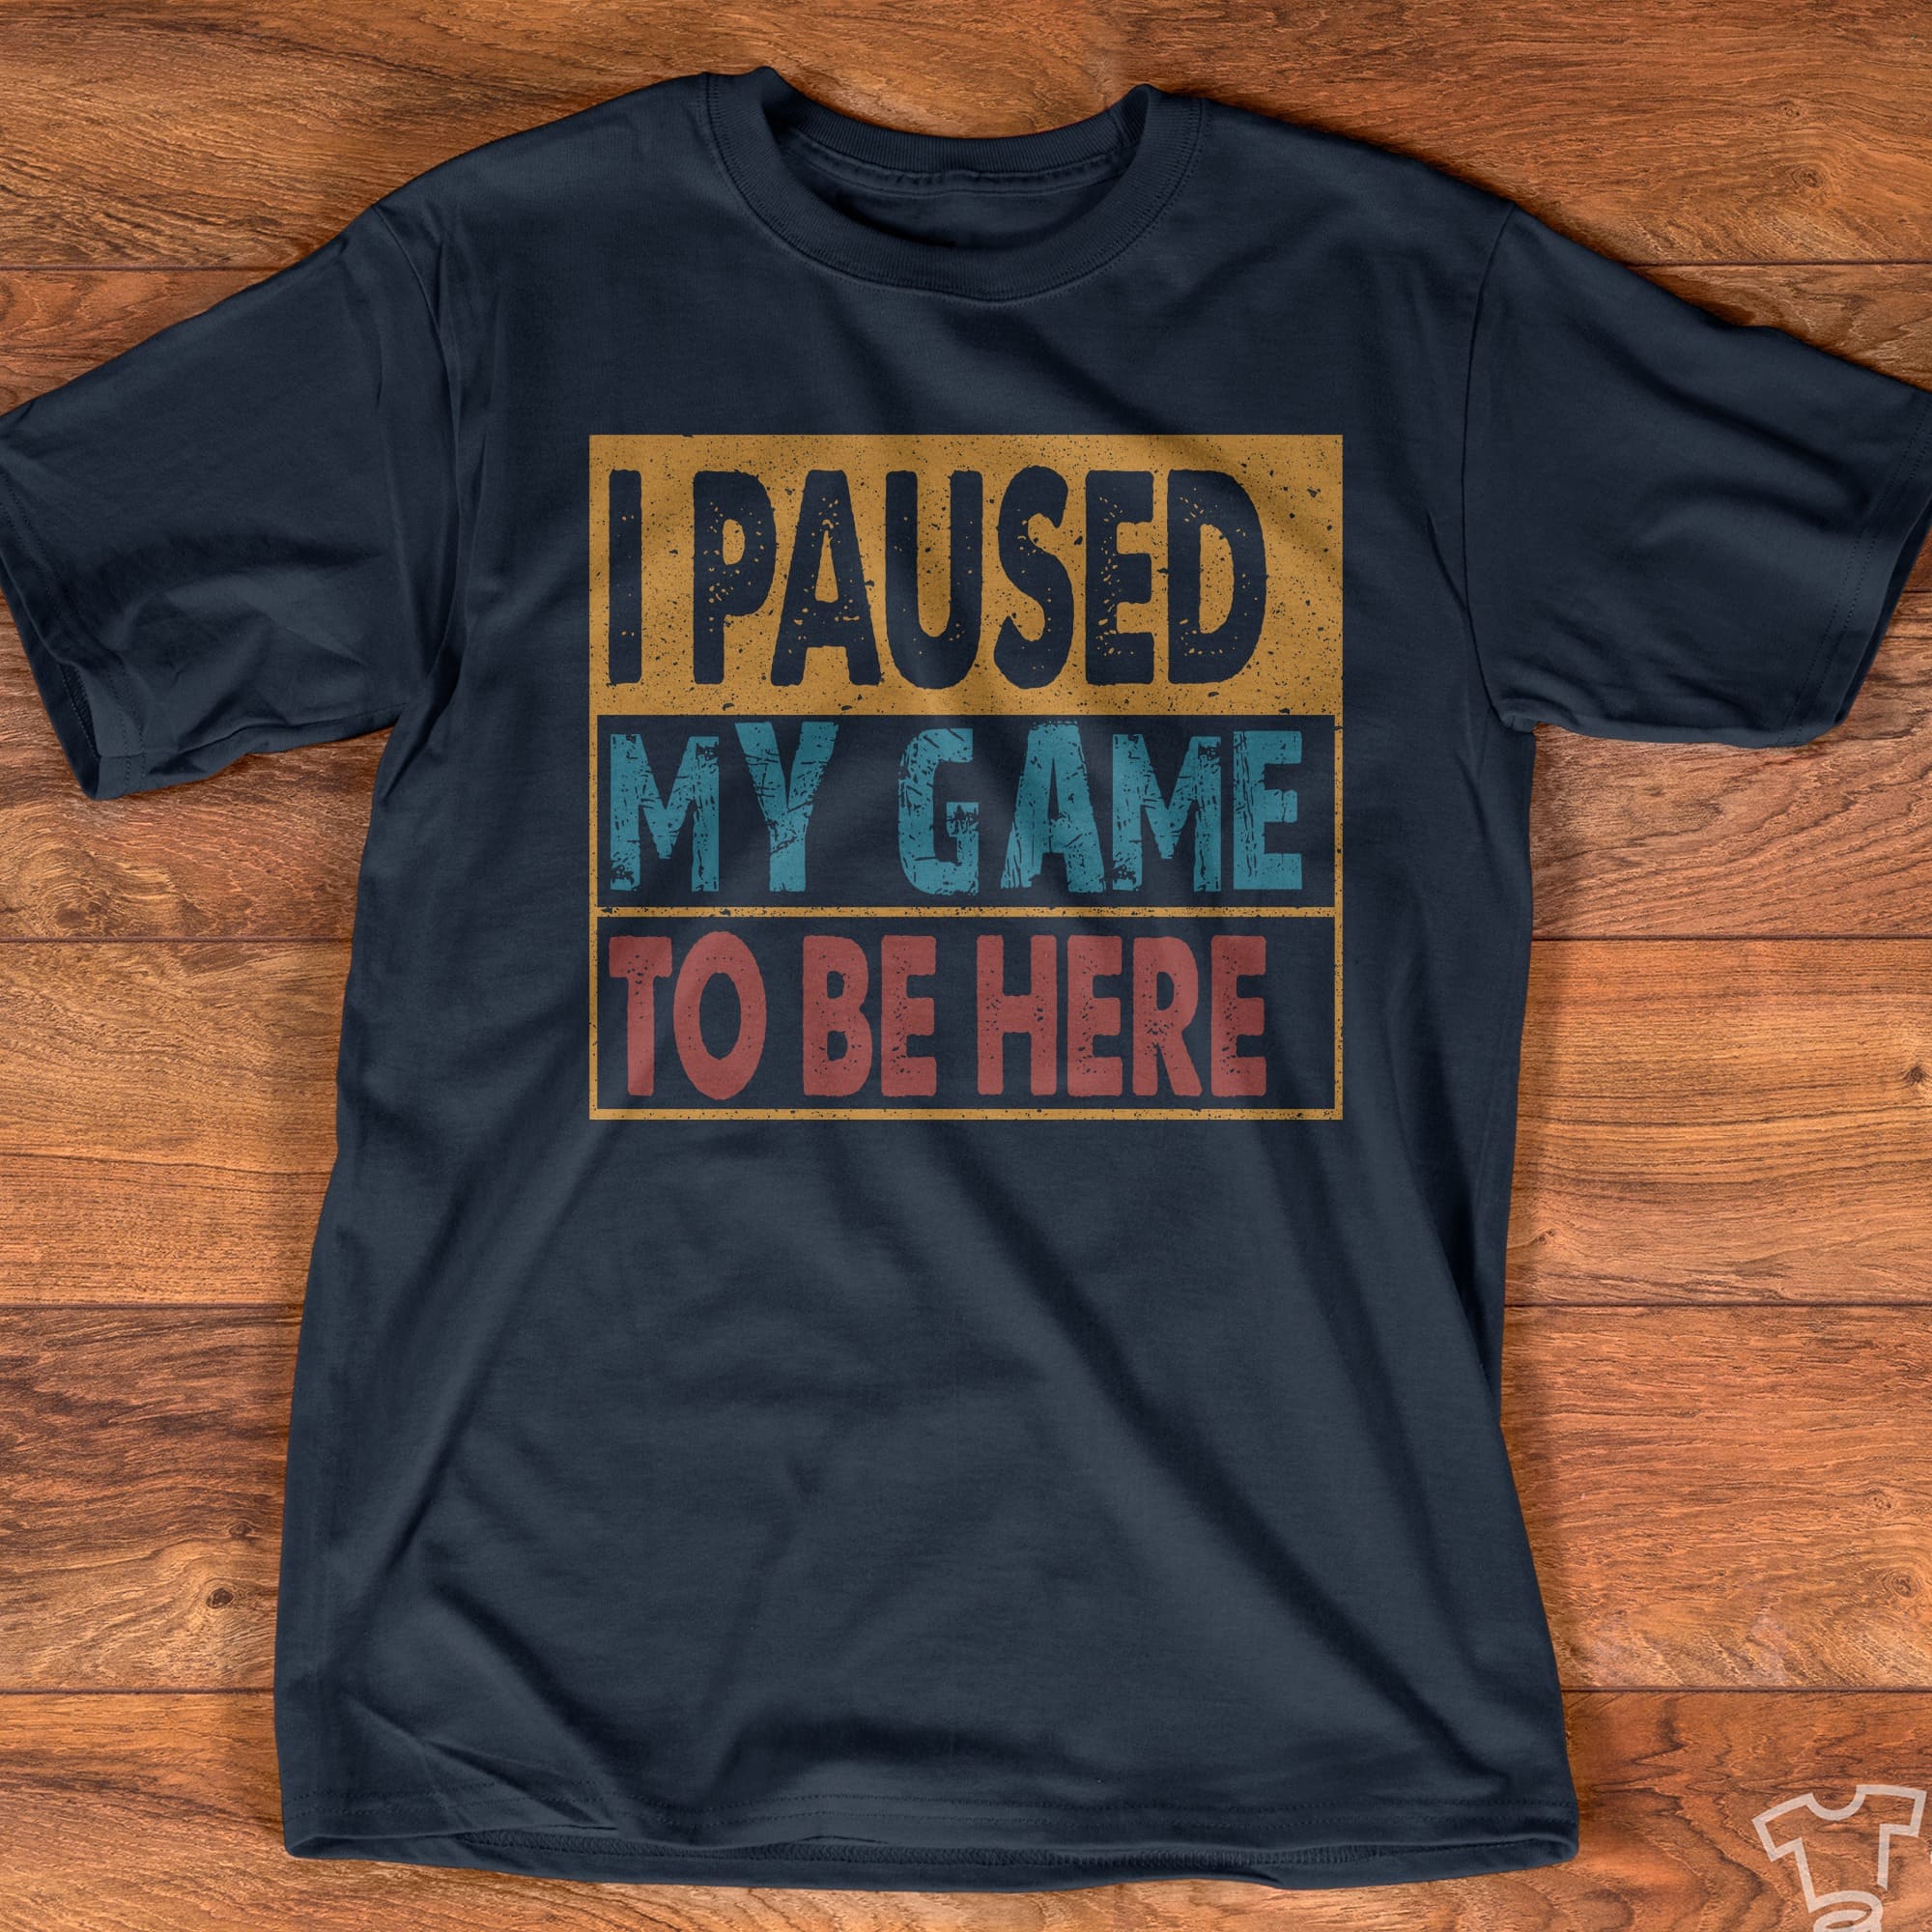 I paused my game to be here - Love playing game, T-shirt for gamers ...